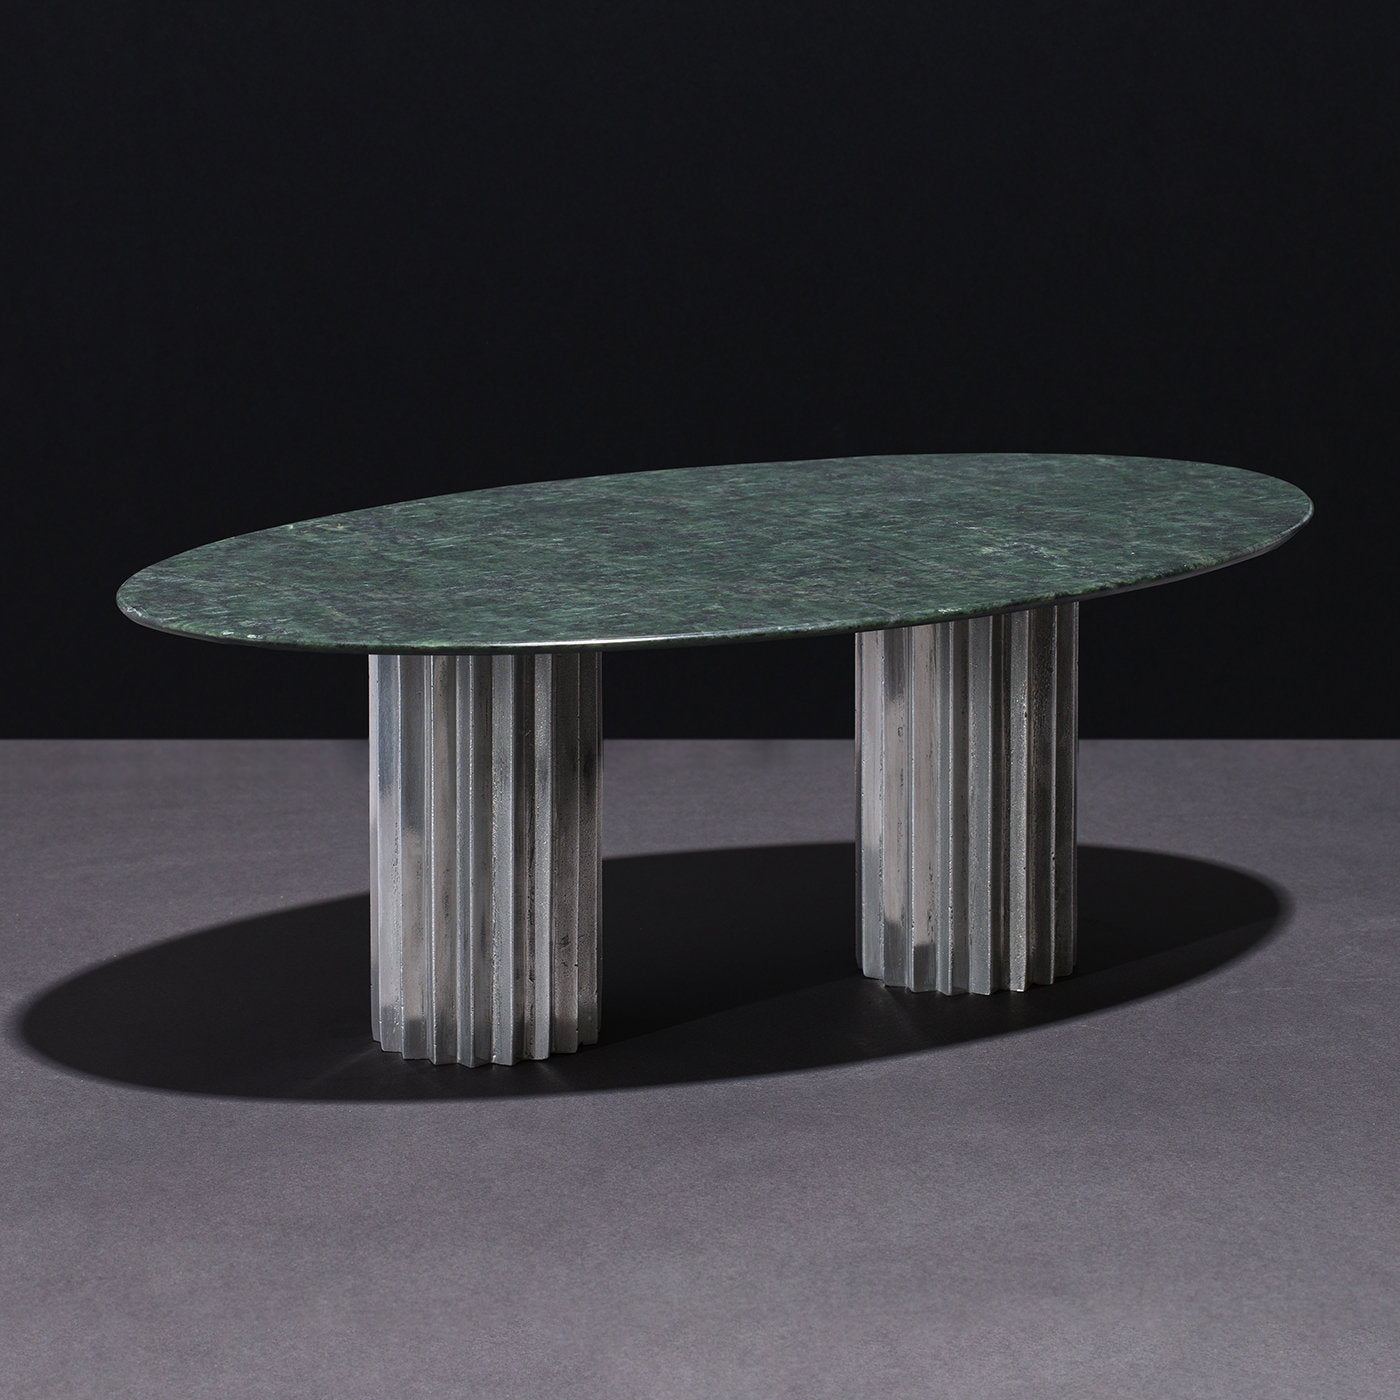 Doris Oval Dining Table in Green Marble and Aluminum - Alternative view 1